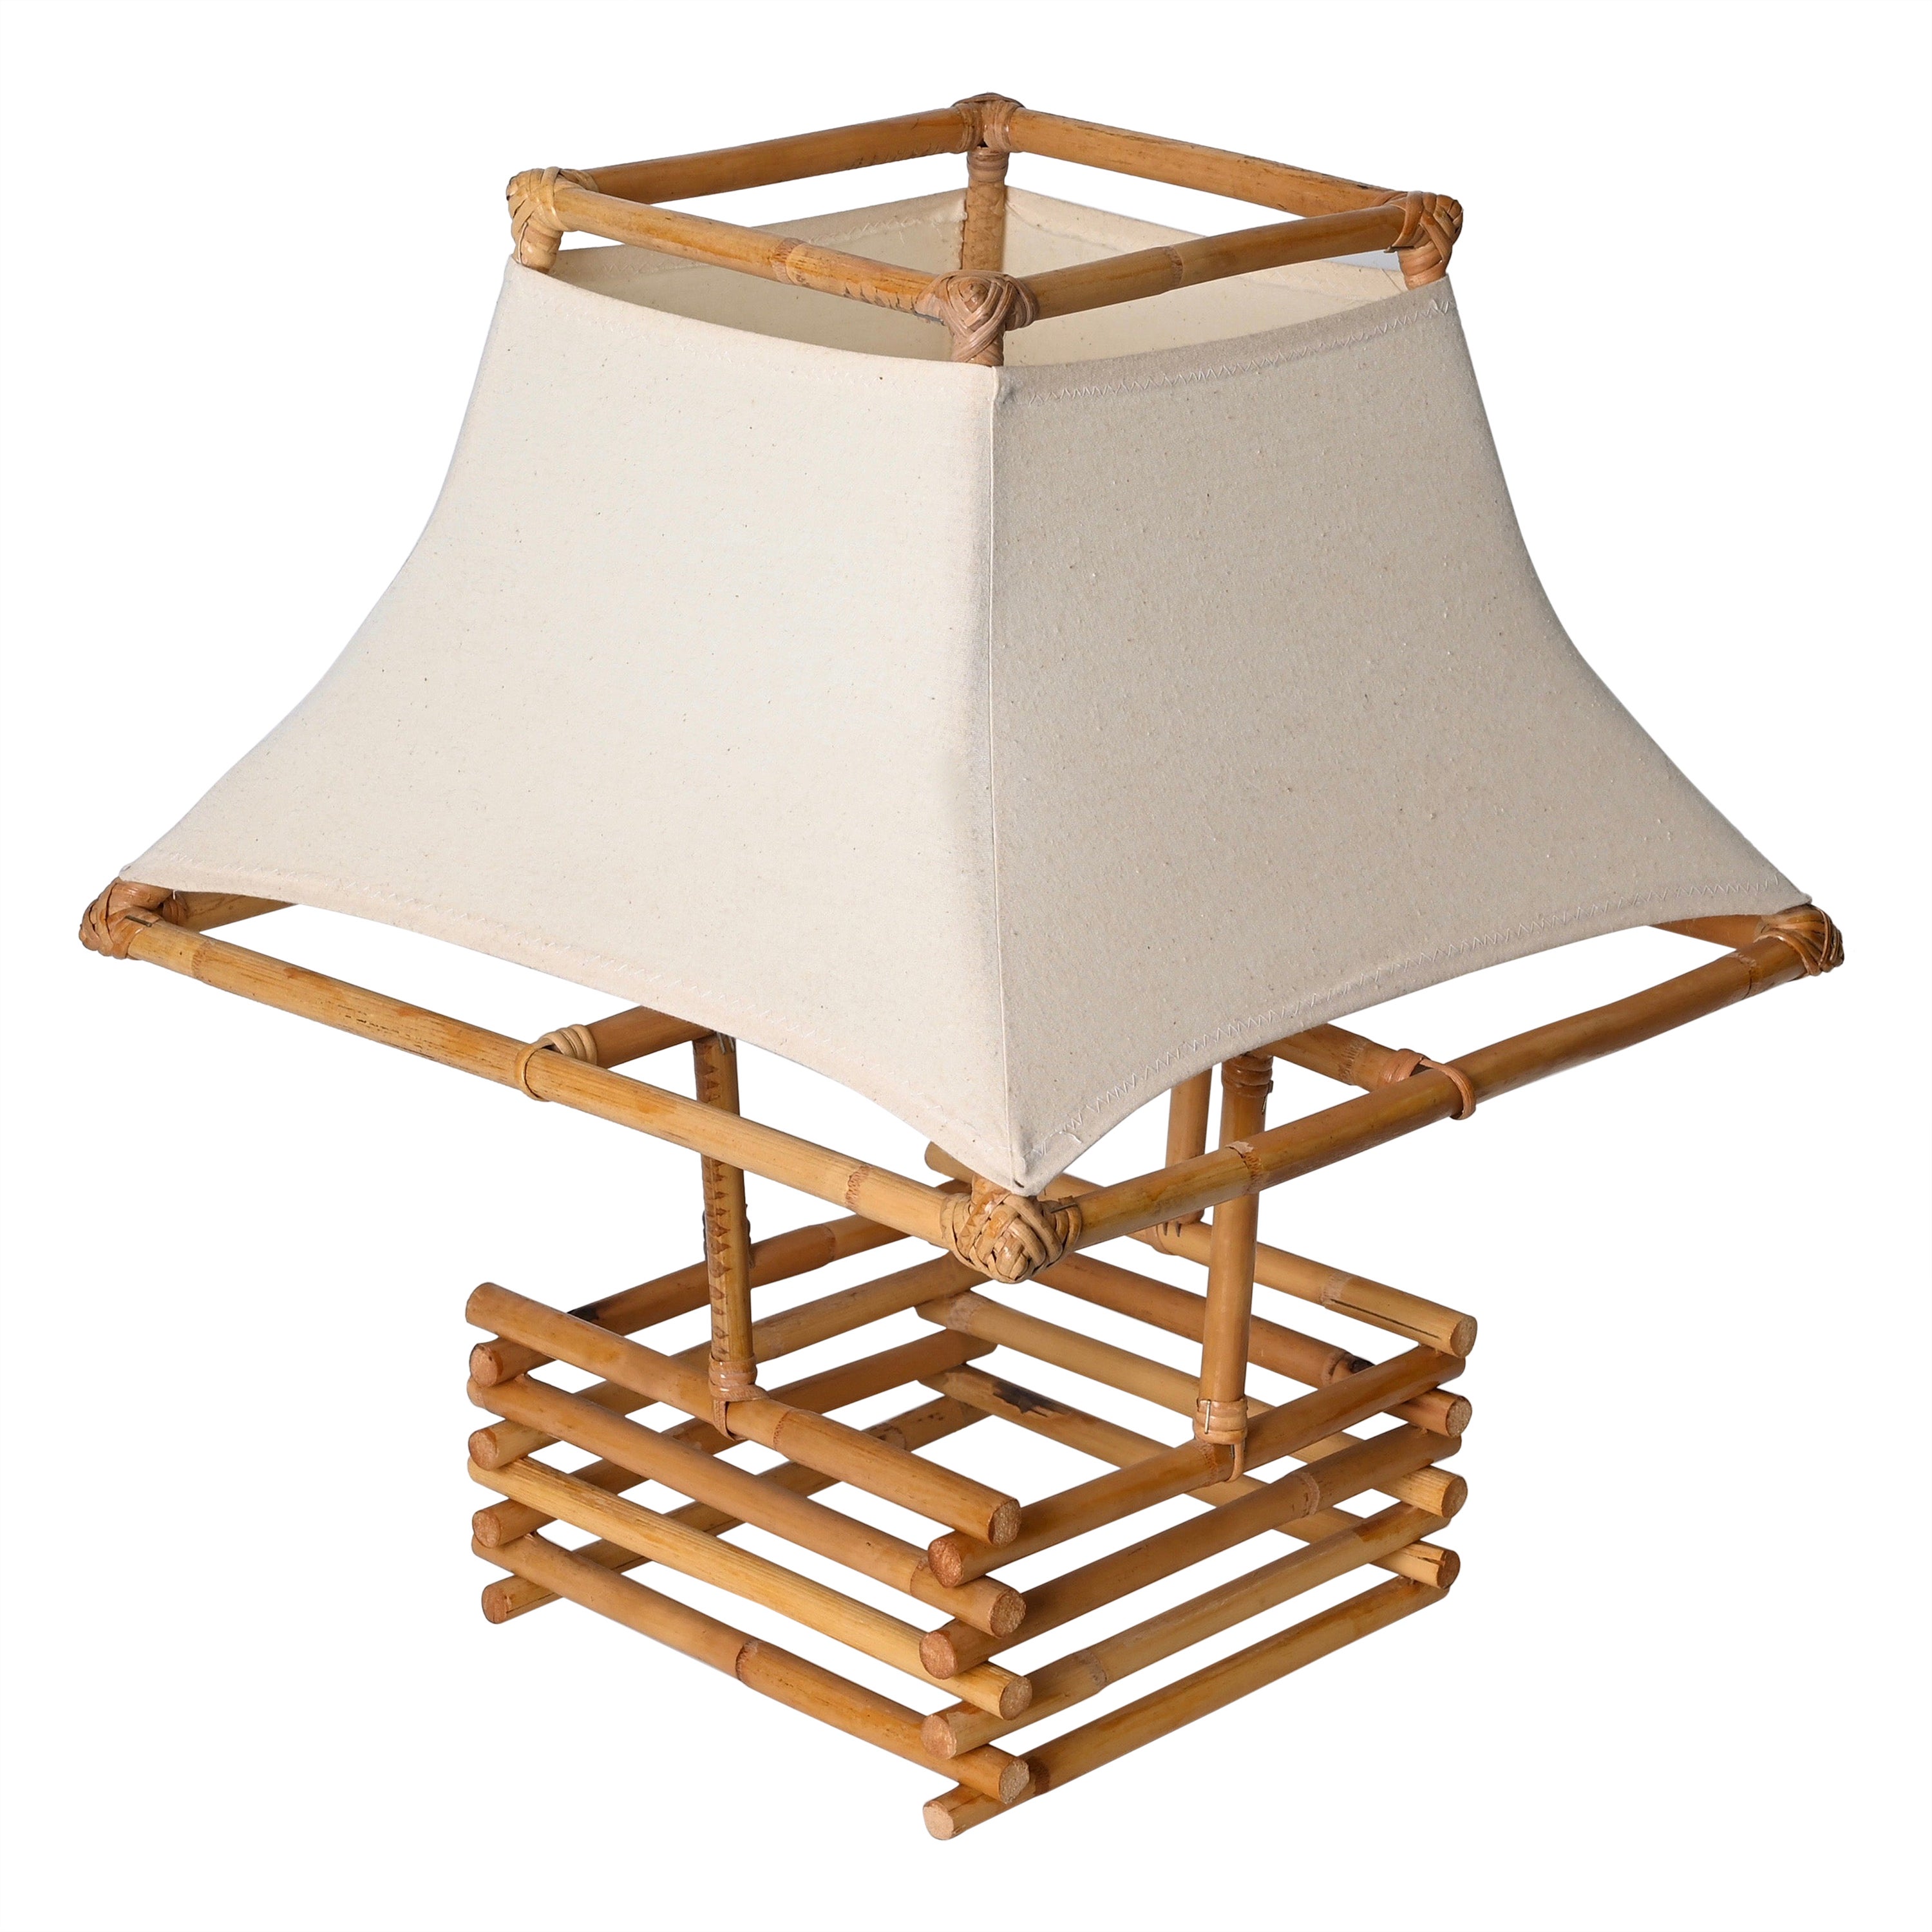 Louis Sognot Rattan, Wicker and White Fabric Table Lamp, France 1960s For Sale